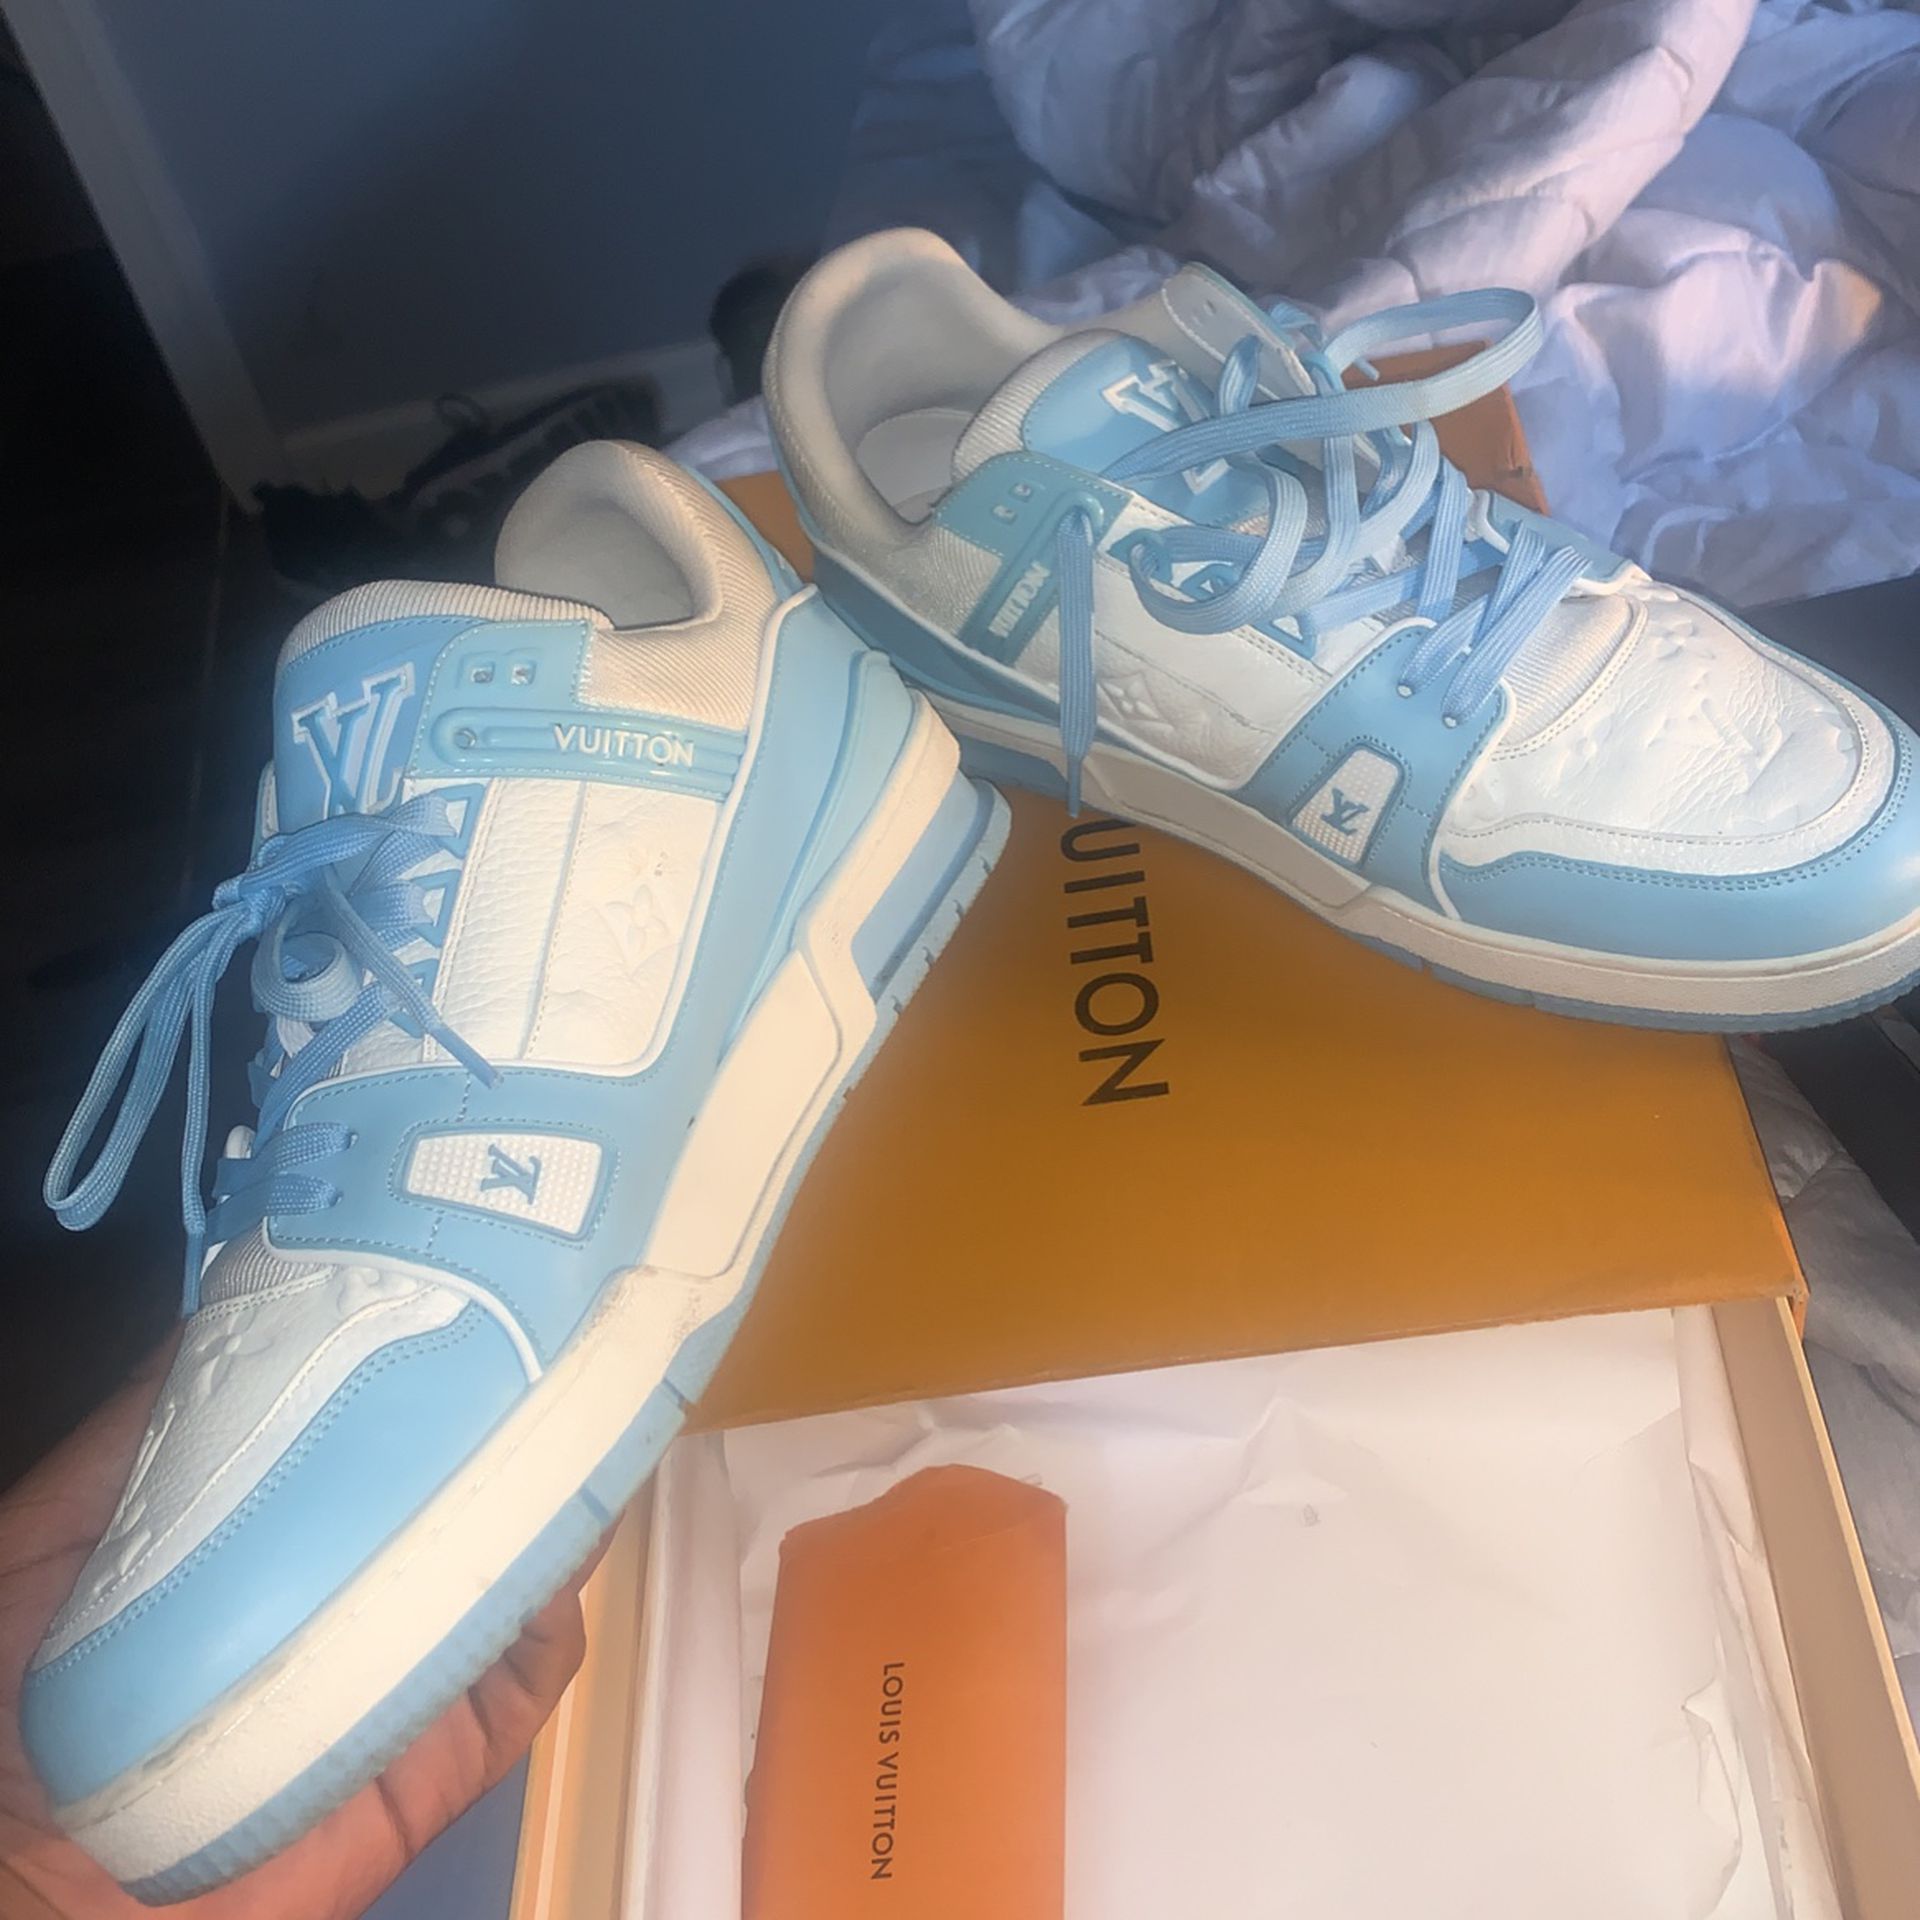 Louis Vuitton Trainer size 44 for Sale in Philadelphia, PA - OfferUp